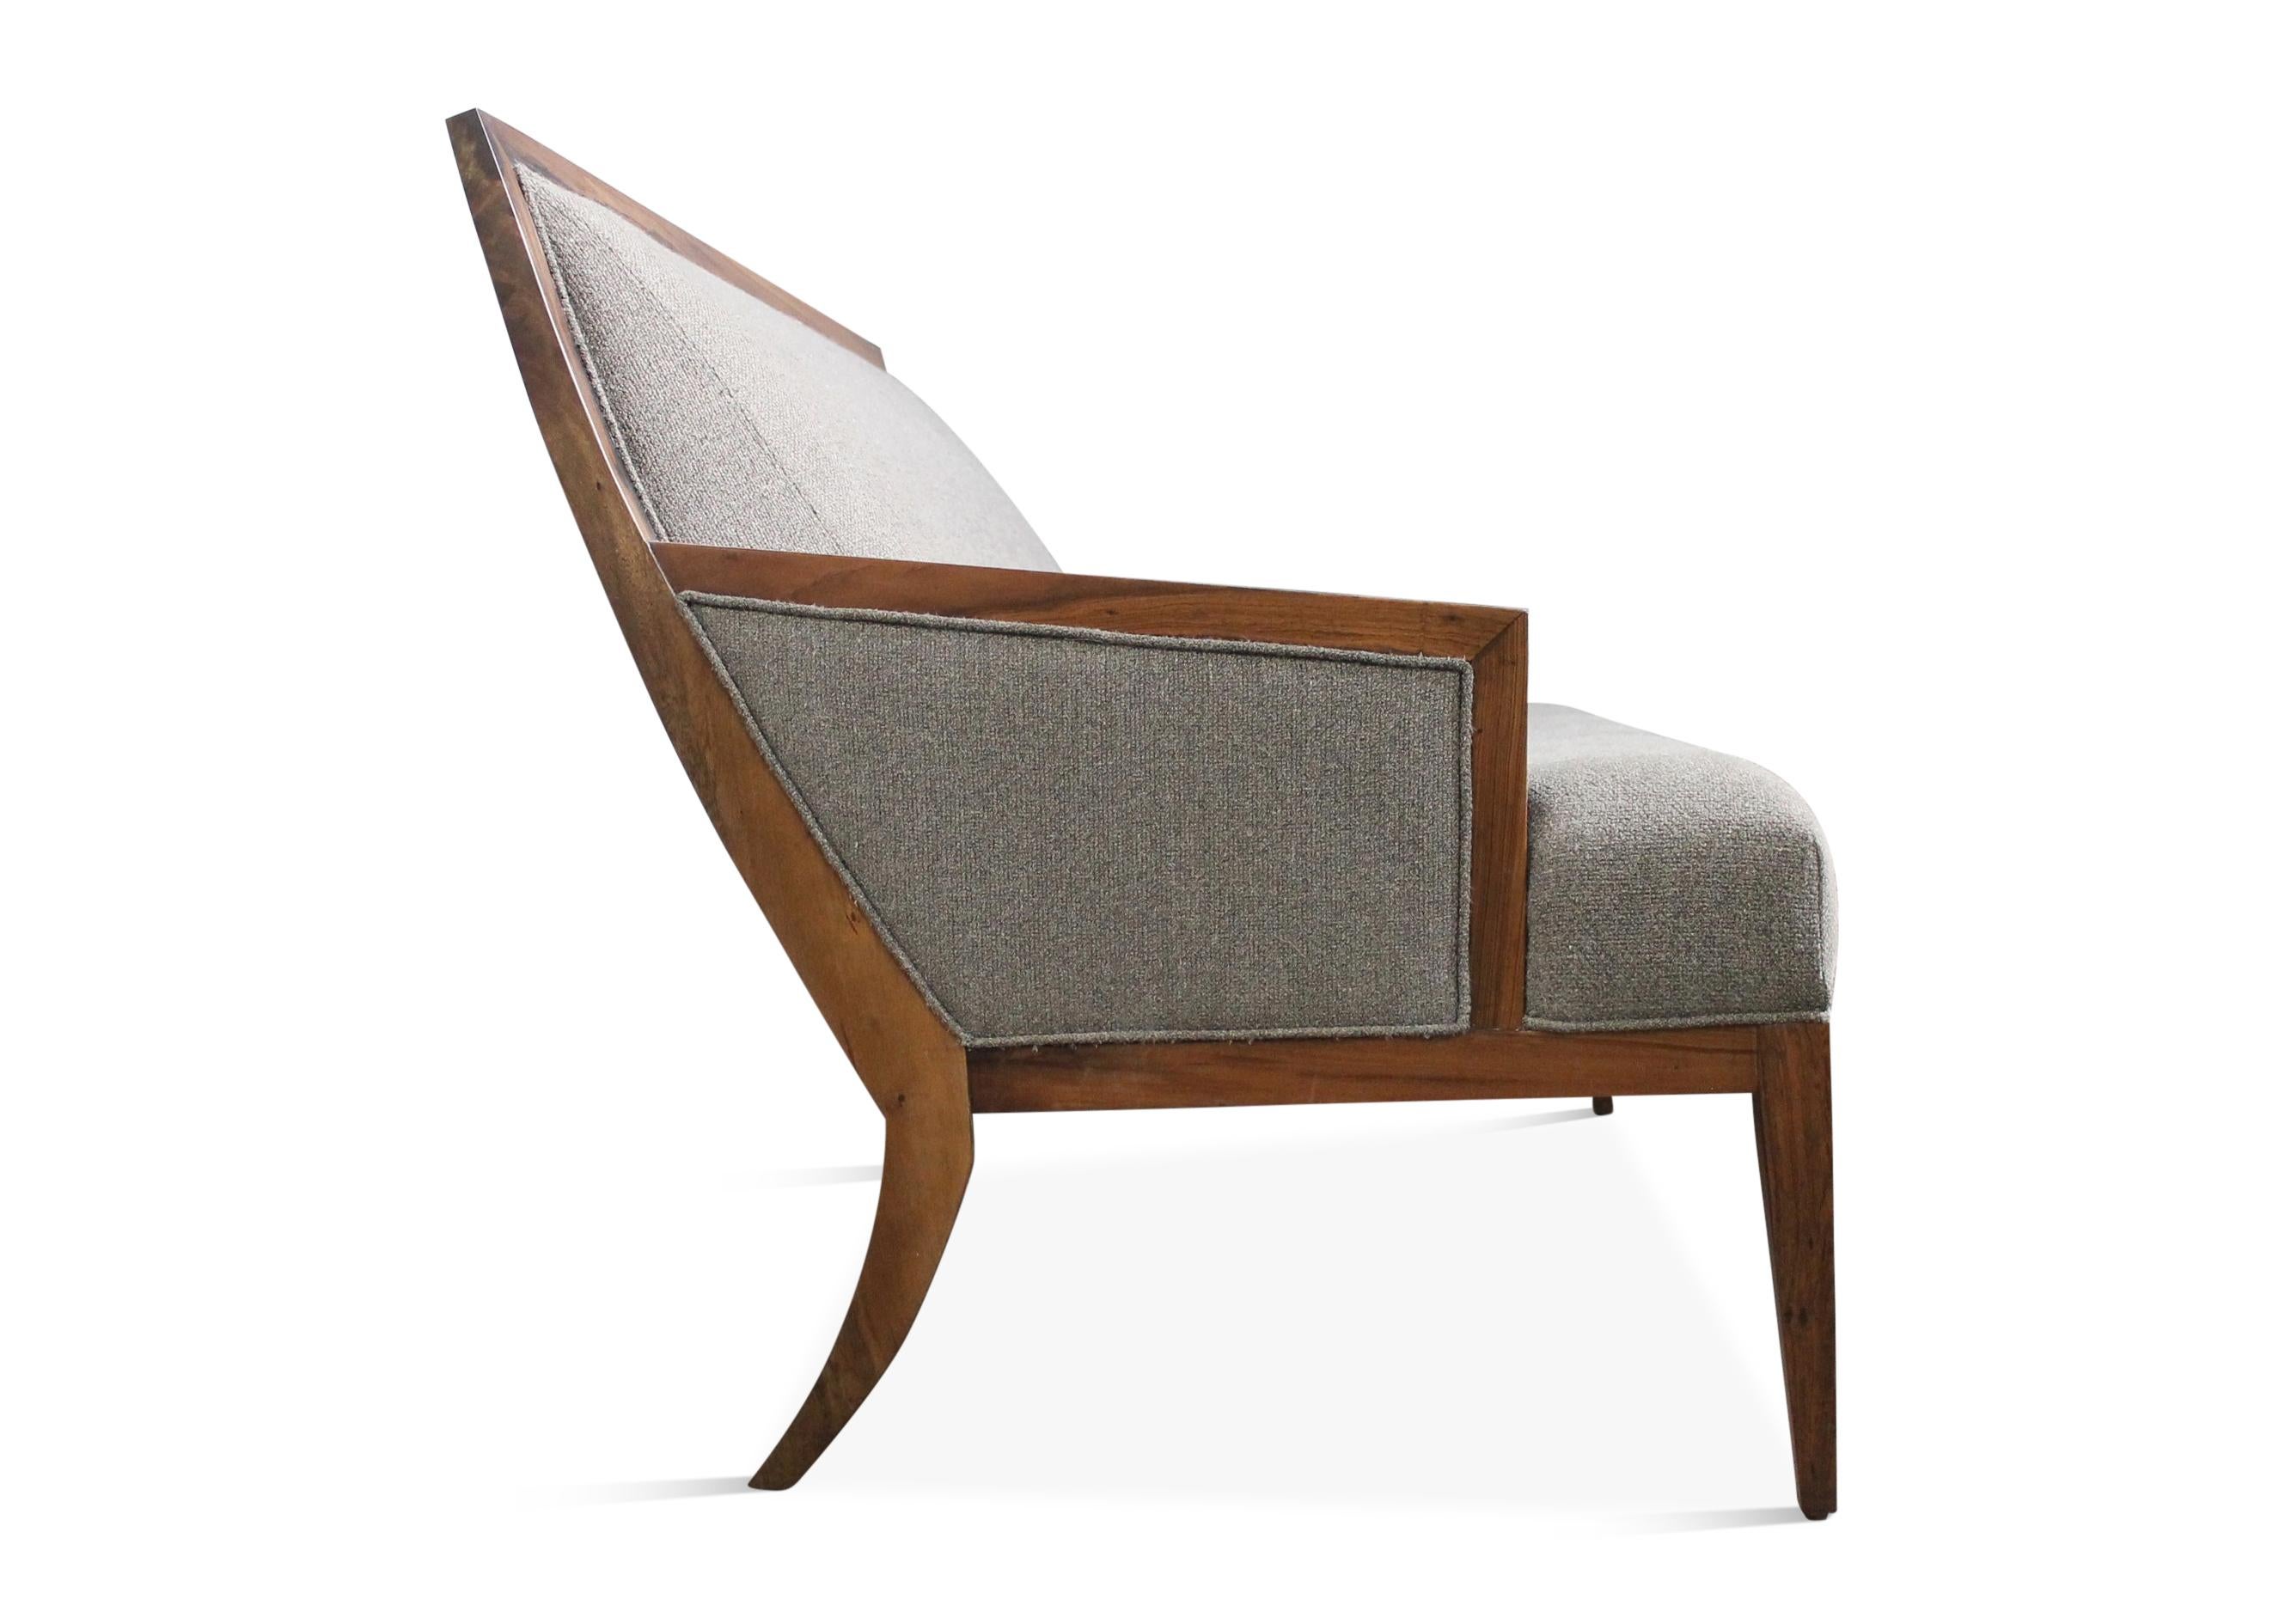 Modern Exotic Wood Contemporary Upholstered Settee from Costantini, Belgrano